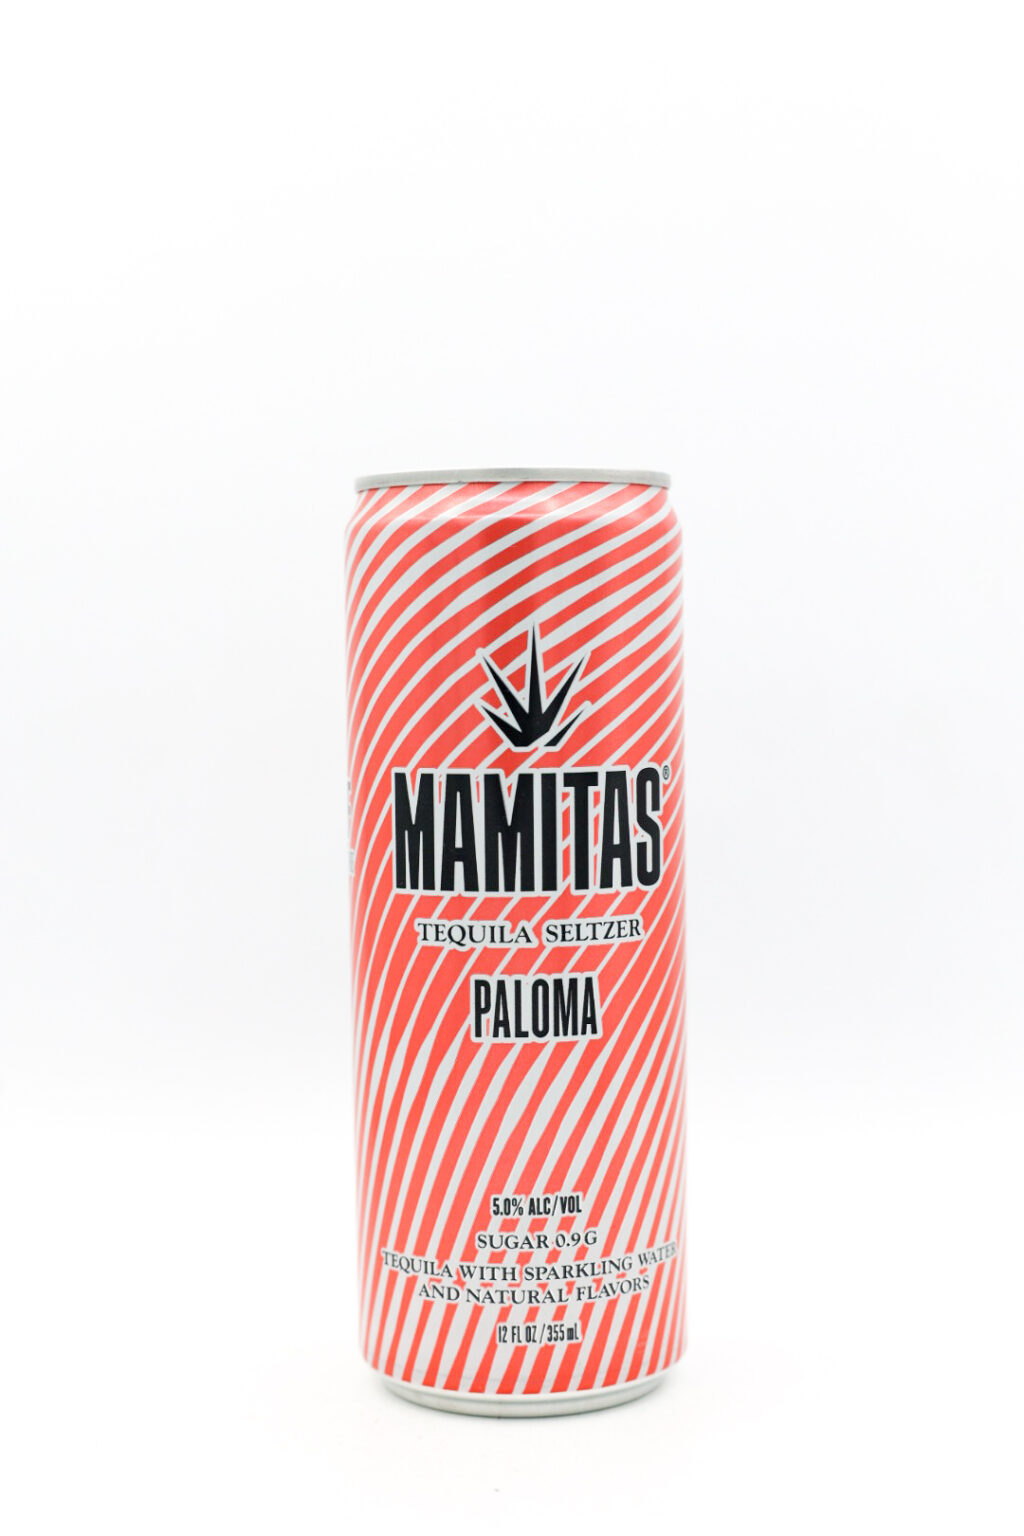 Mamitas Spiked Seltzer 1 can